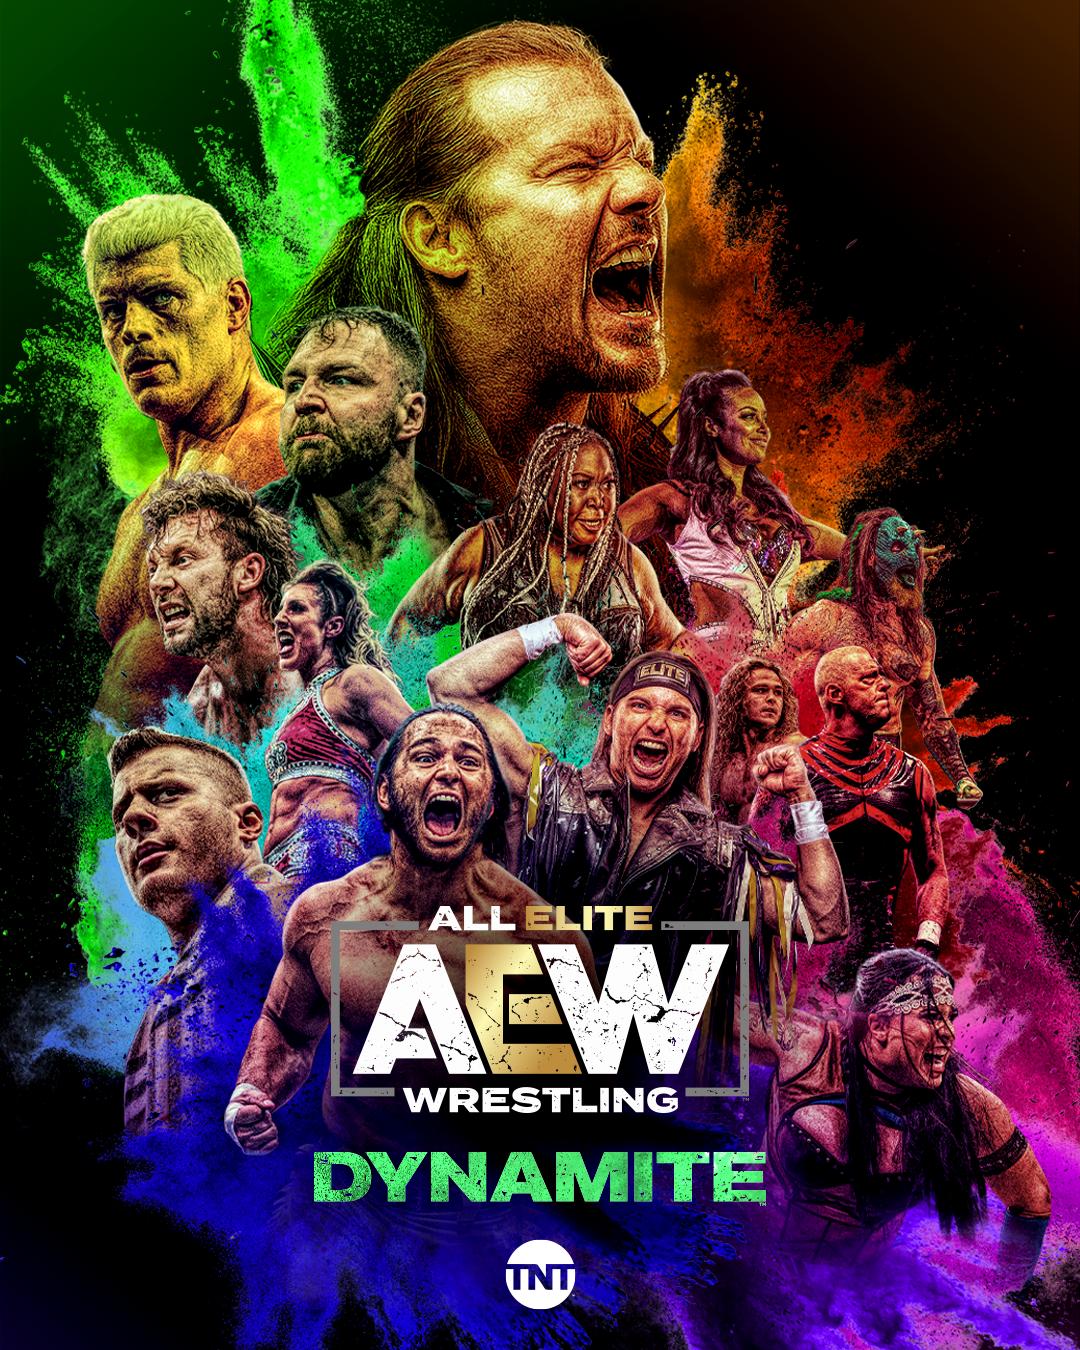 aew roster page